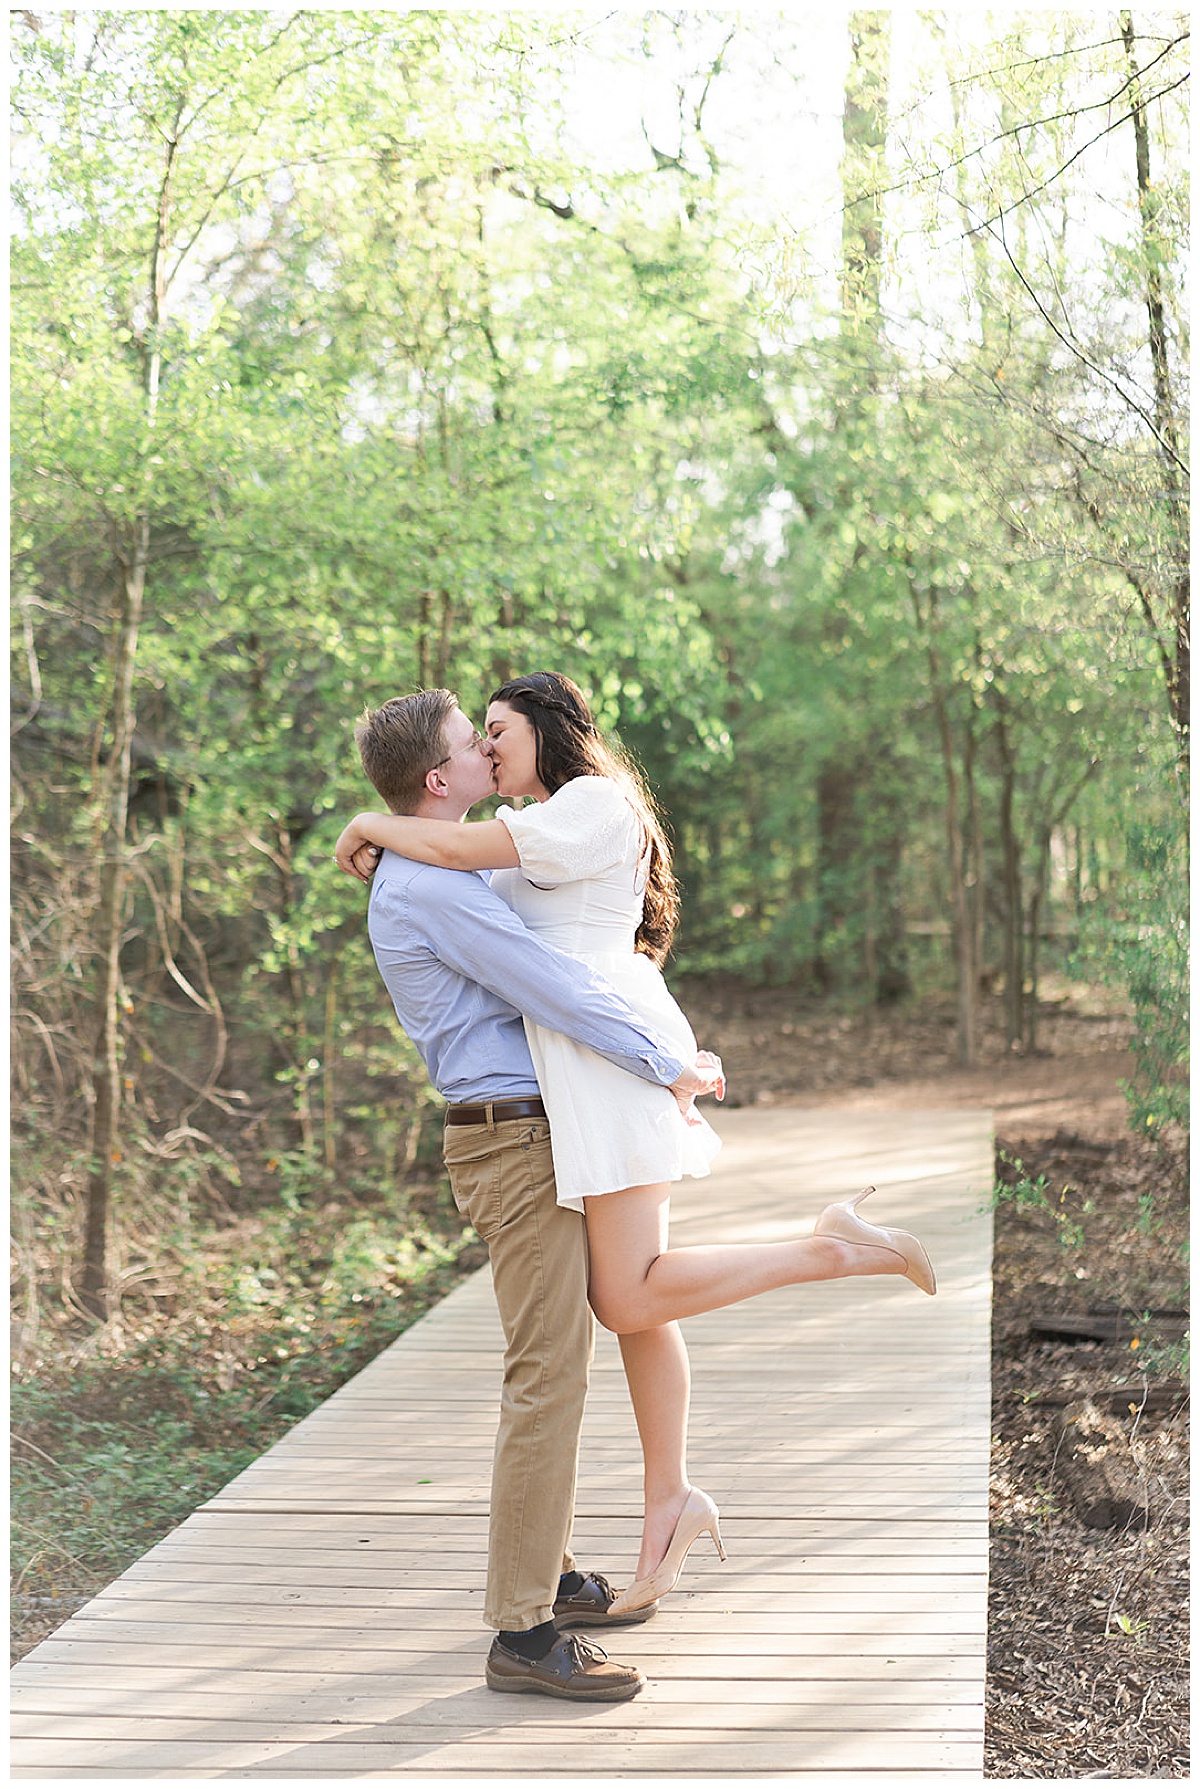 Woman kisses man and dance together during Houston Arboretum Engagement Session